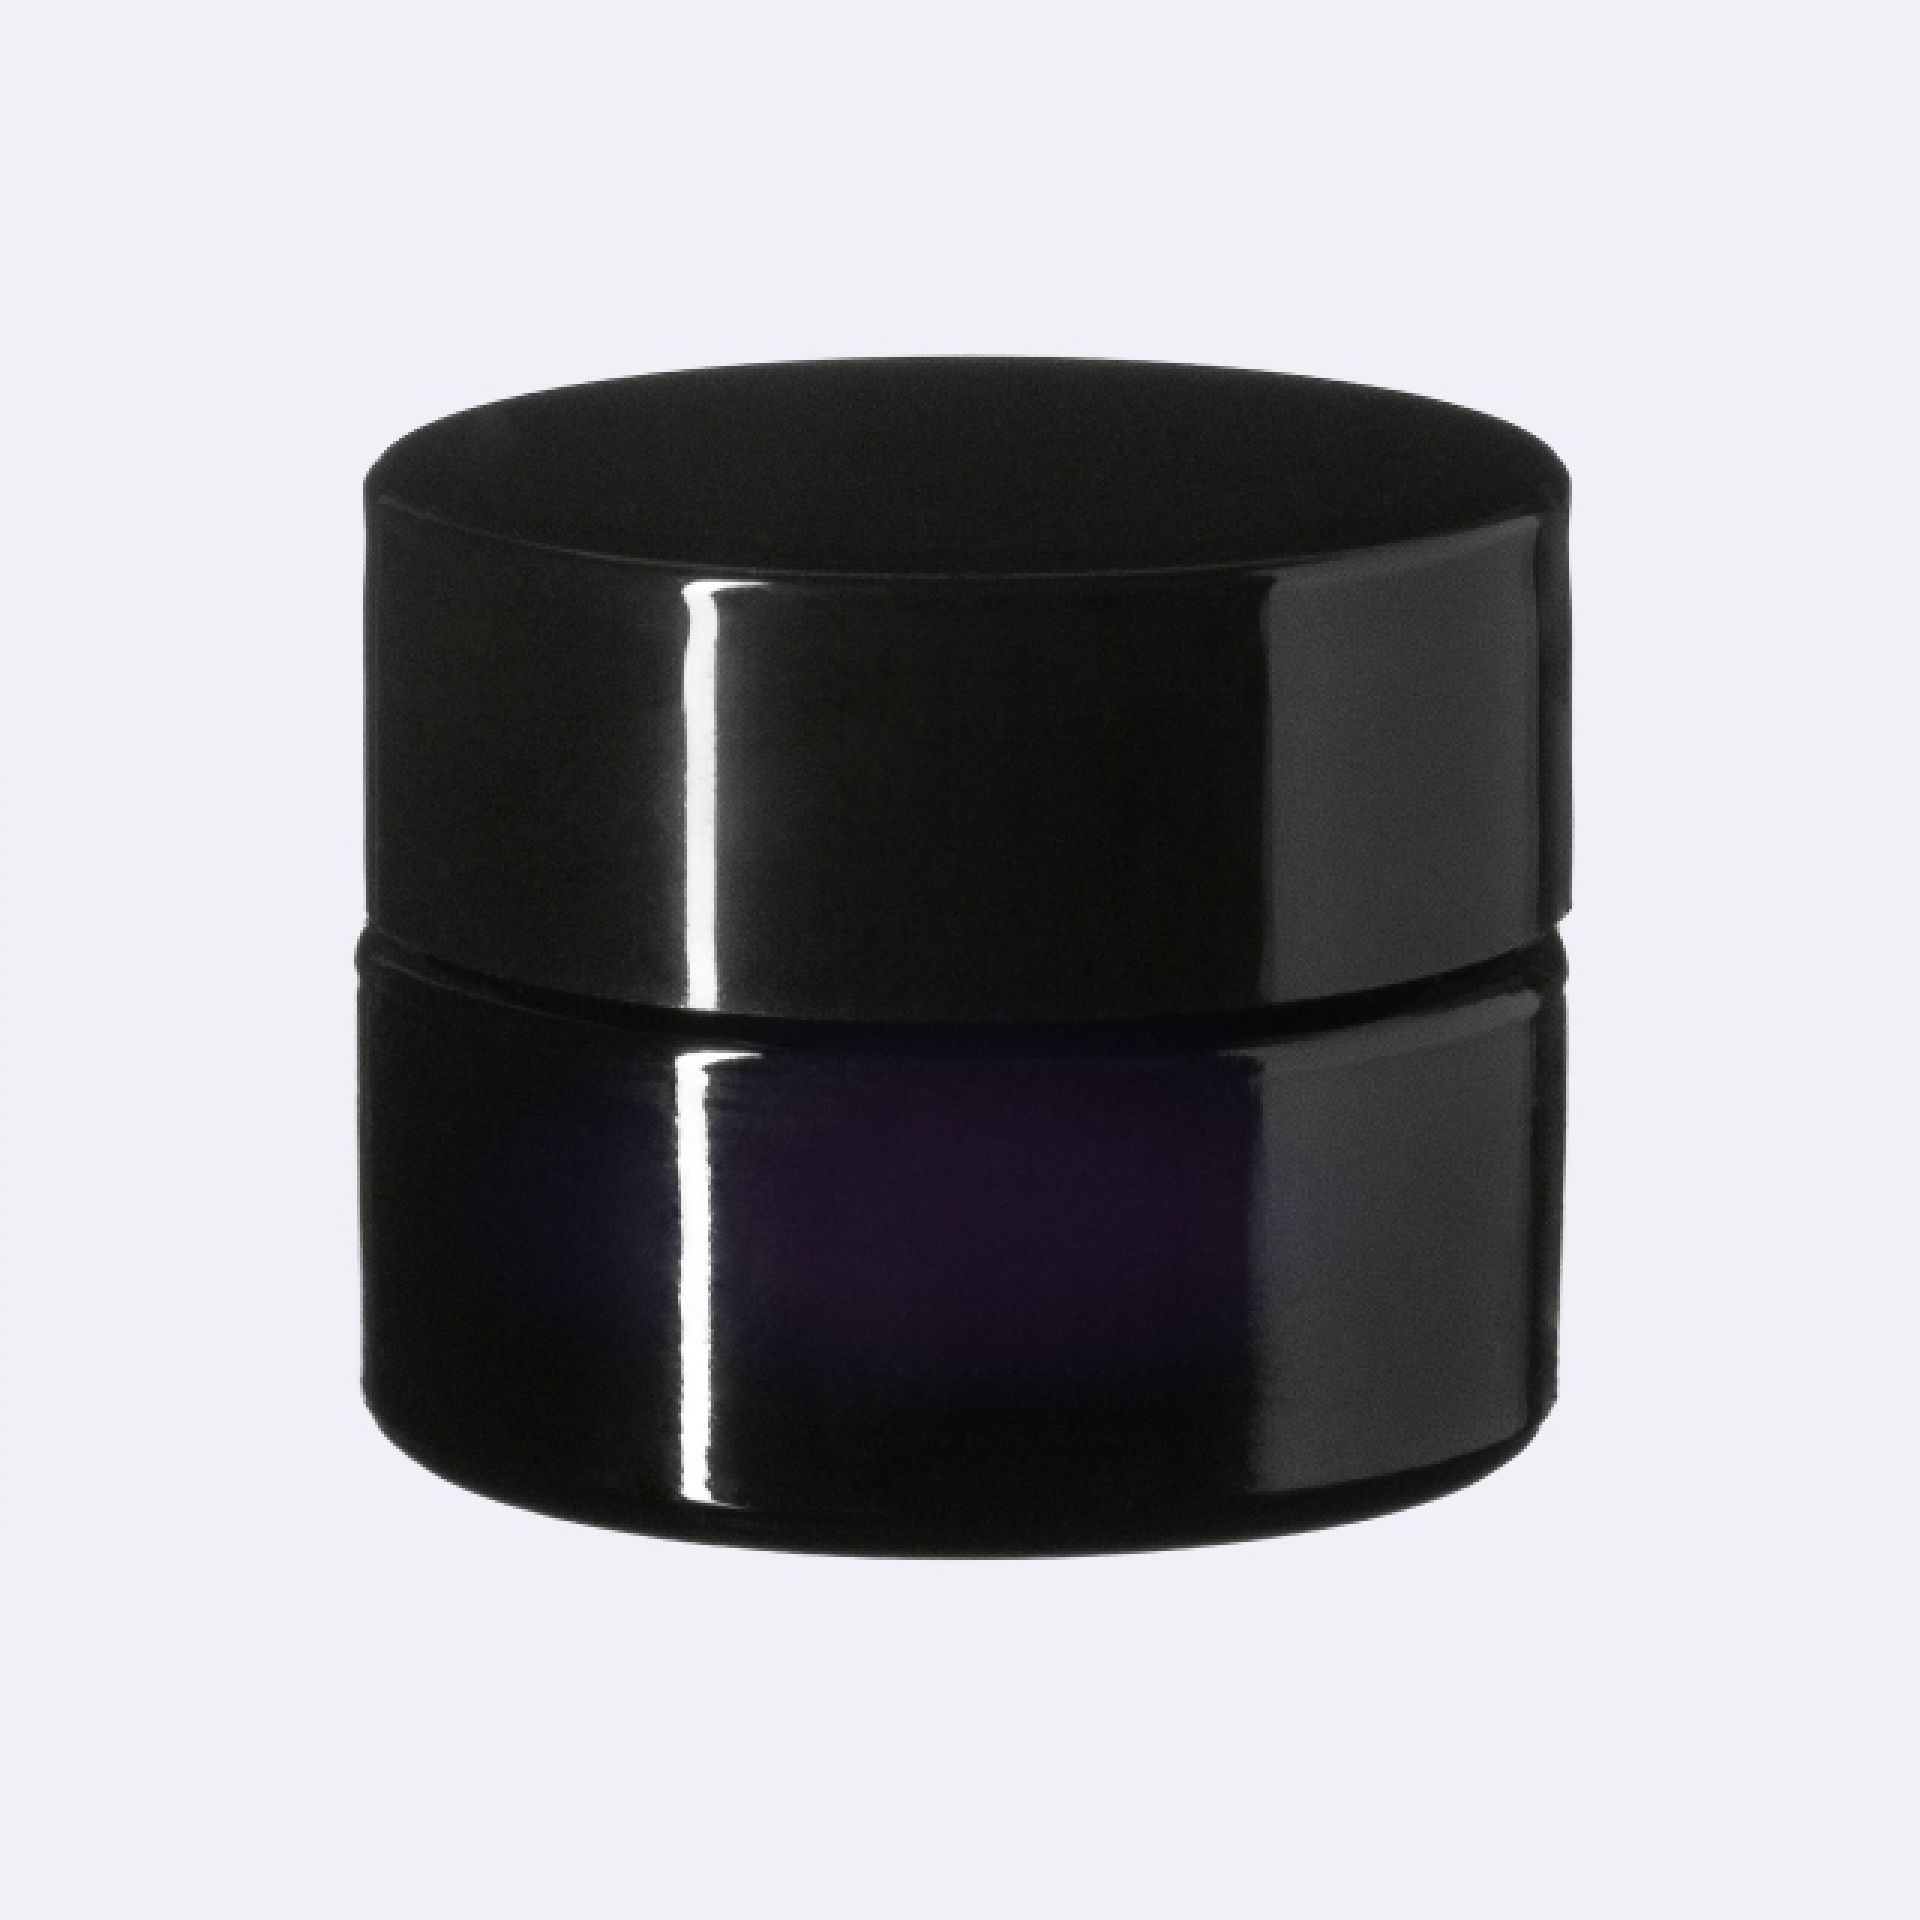 Lid Modern 30 special, UREA, black, semi-glossy finish, violet Phan inlay (Ceres 5)